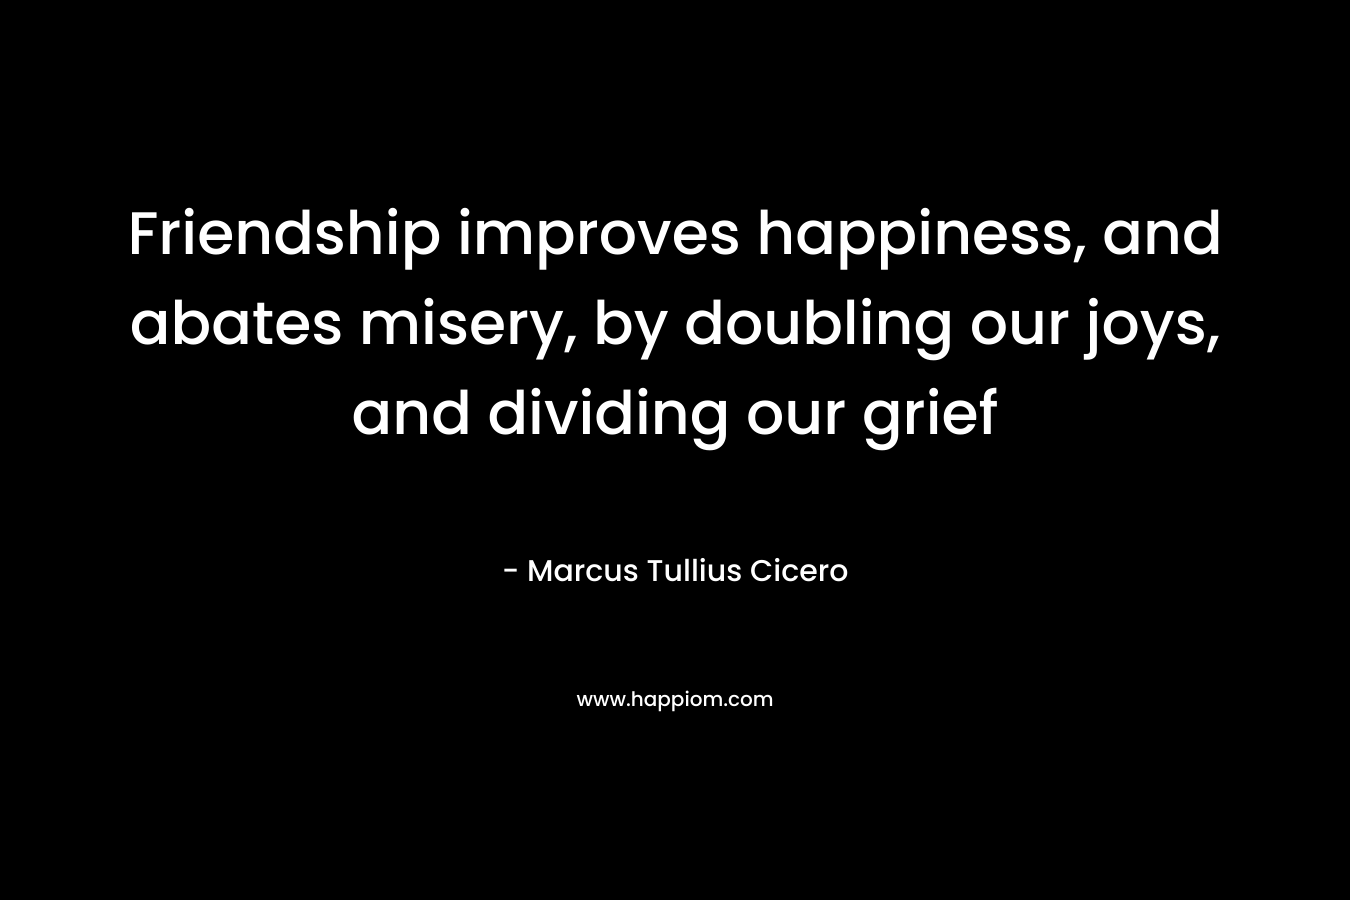 Friendship improves happiness, and abates misery, by doubling our joys, and dividing our grief